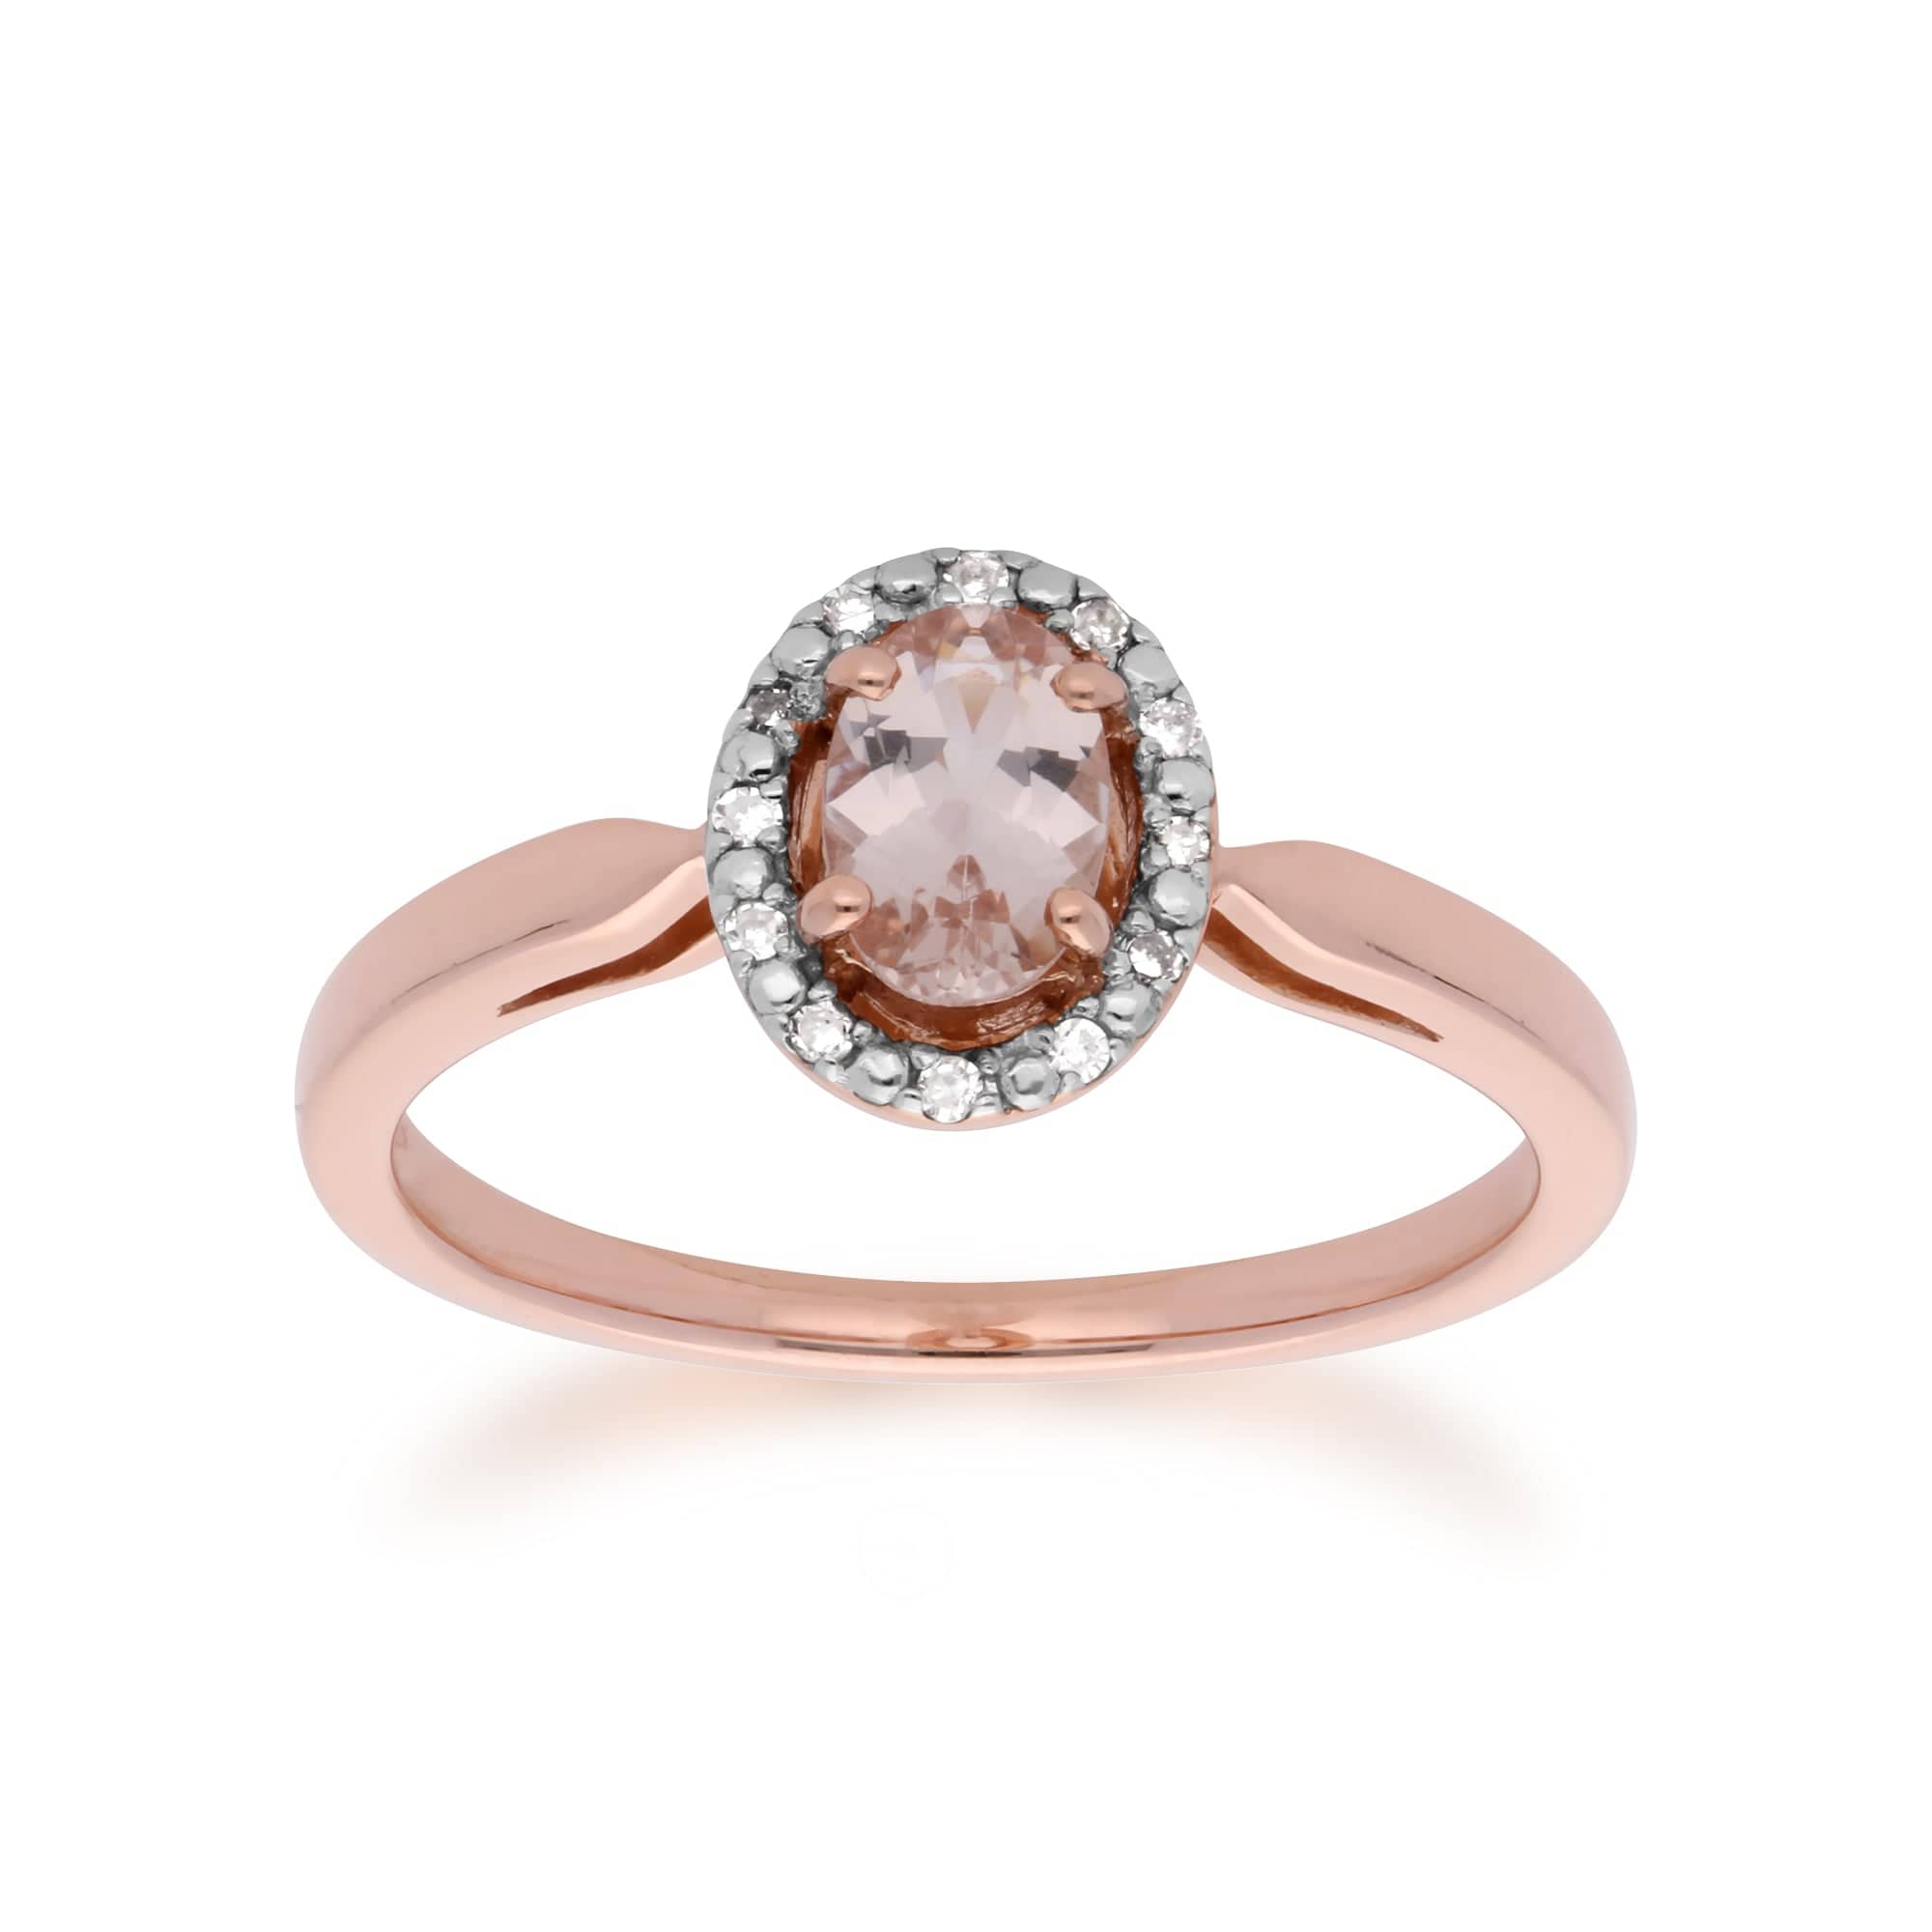 Classic Oval Morganite & Diamond Halo Stud Earrings & Solitaire Ring Set in 9ct Rose Gold - Gemondo